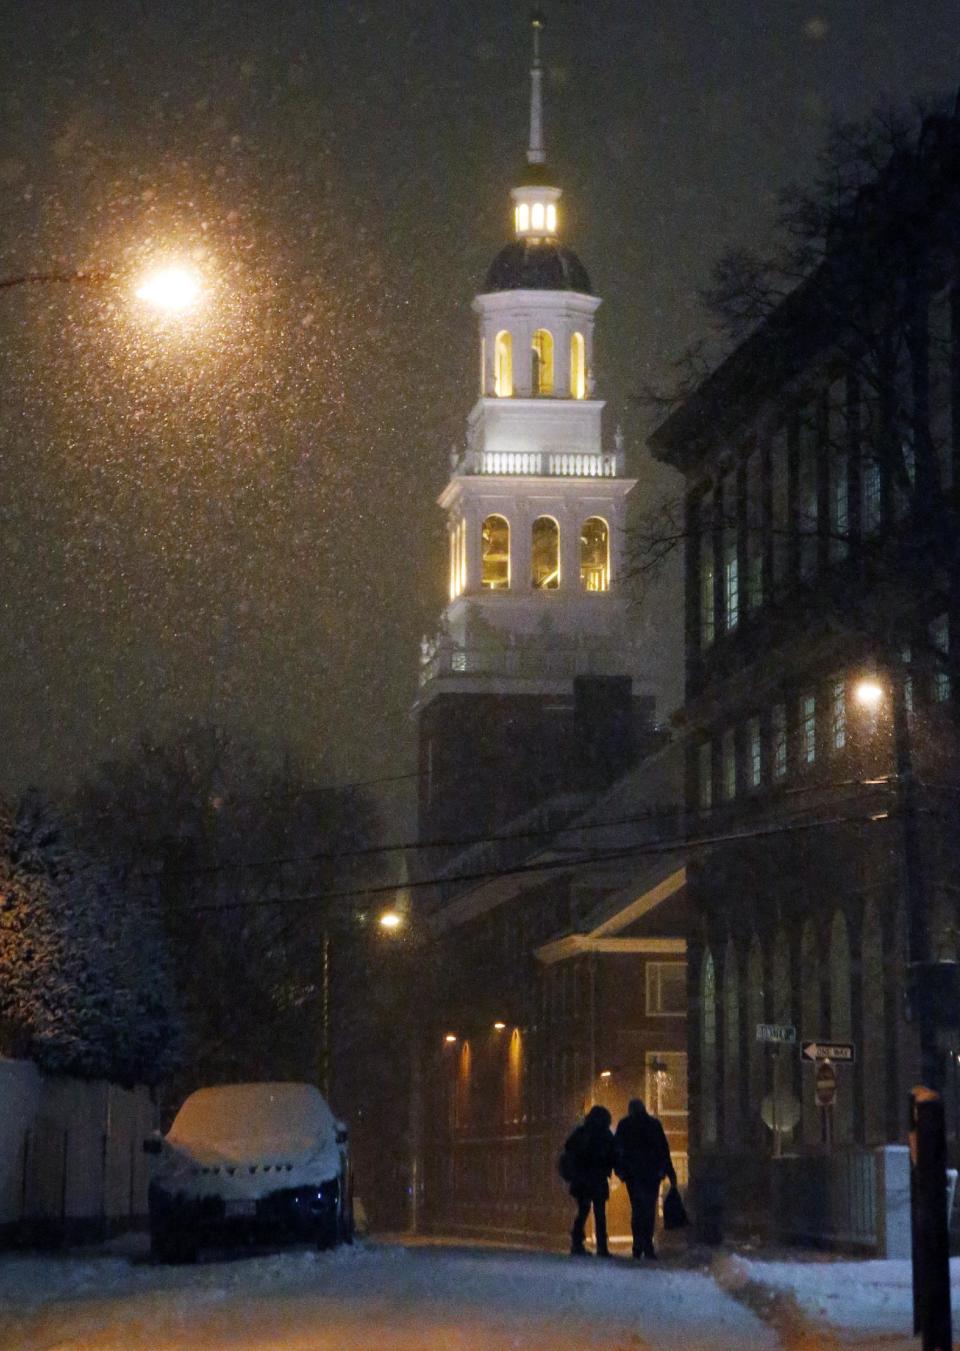 A couple walk as snow falls in Harvard Square in Cambridge, Mass. Tuesday, Jan. 21, 2014. Heavy snow has been forecast and a blizzard warning was posted for portions of Massachusetts. (AP Photo/Elise Amendola)